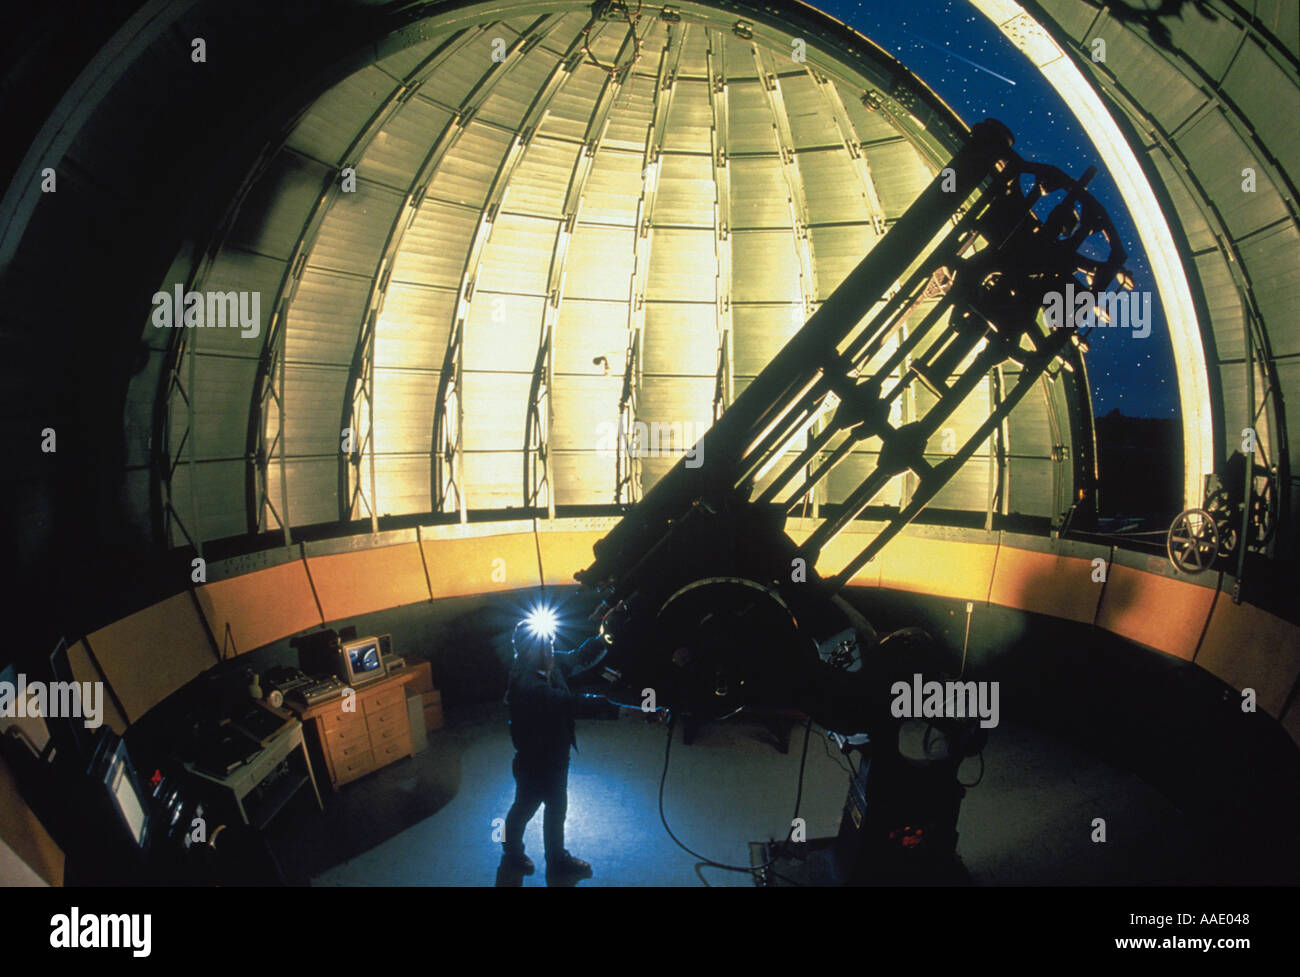 An astronomer uses a classic telescope to study planets and stars from an old observatory Stock Photo